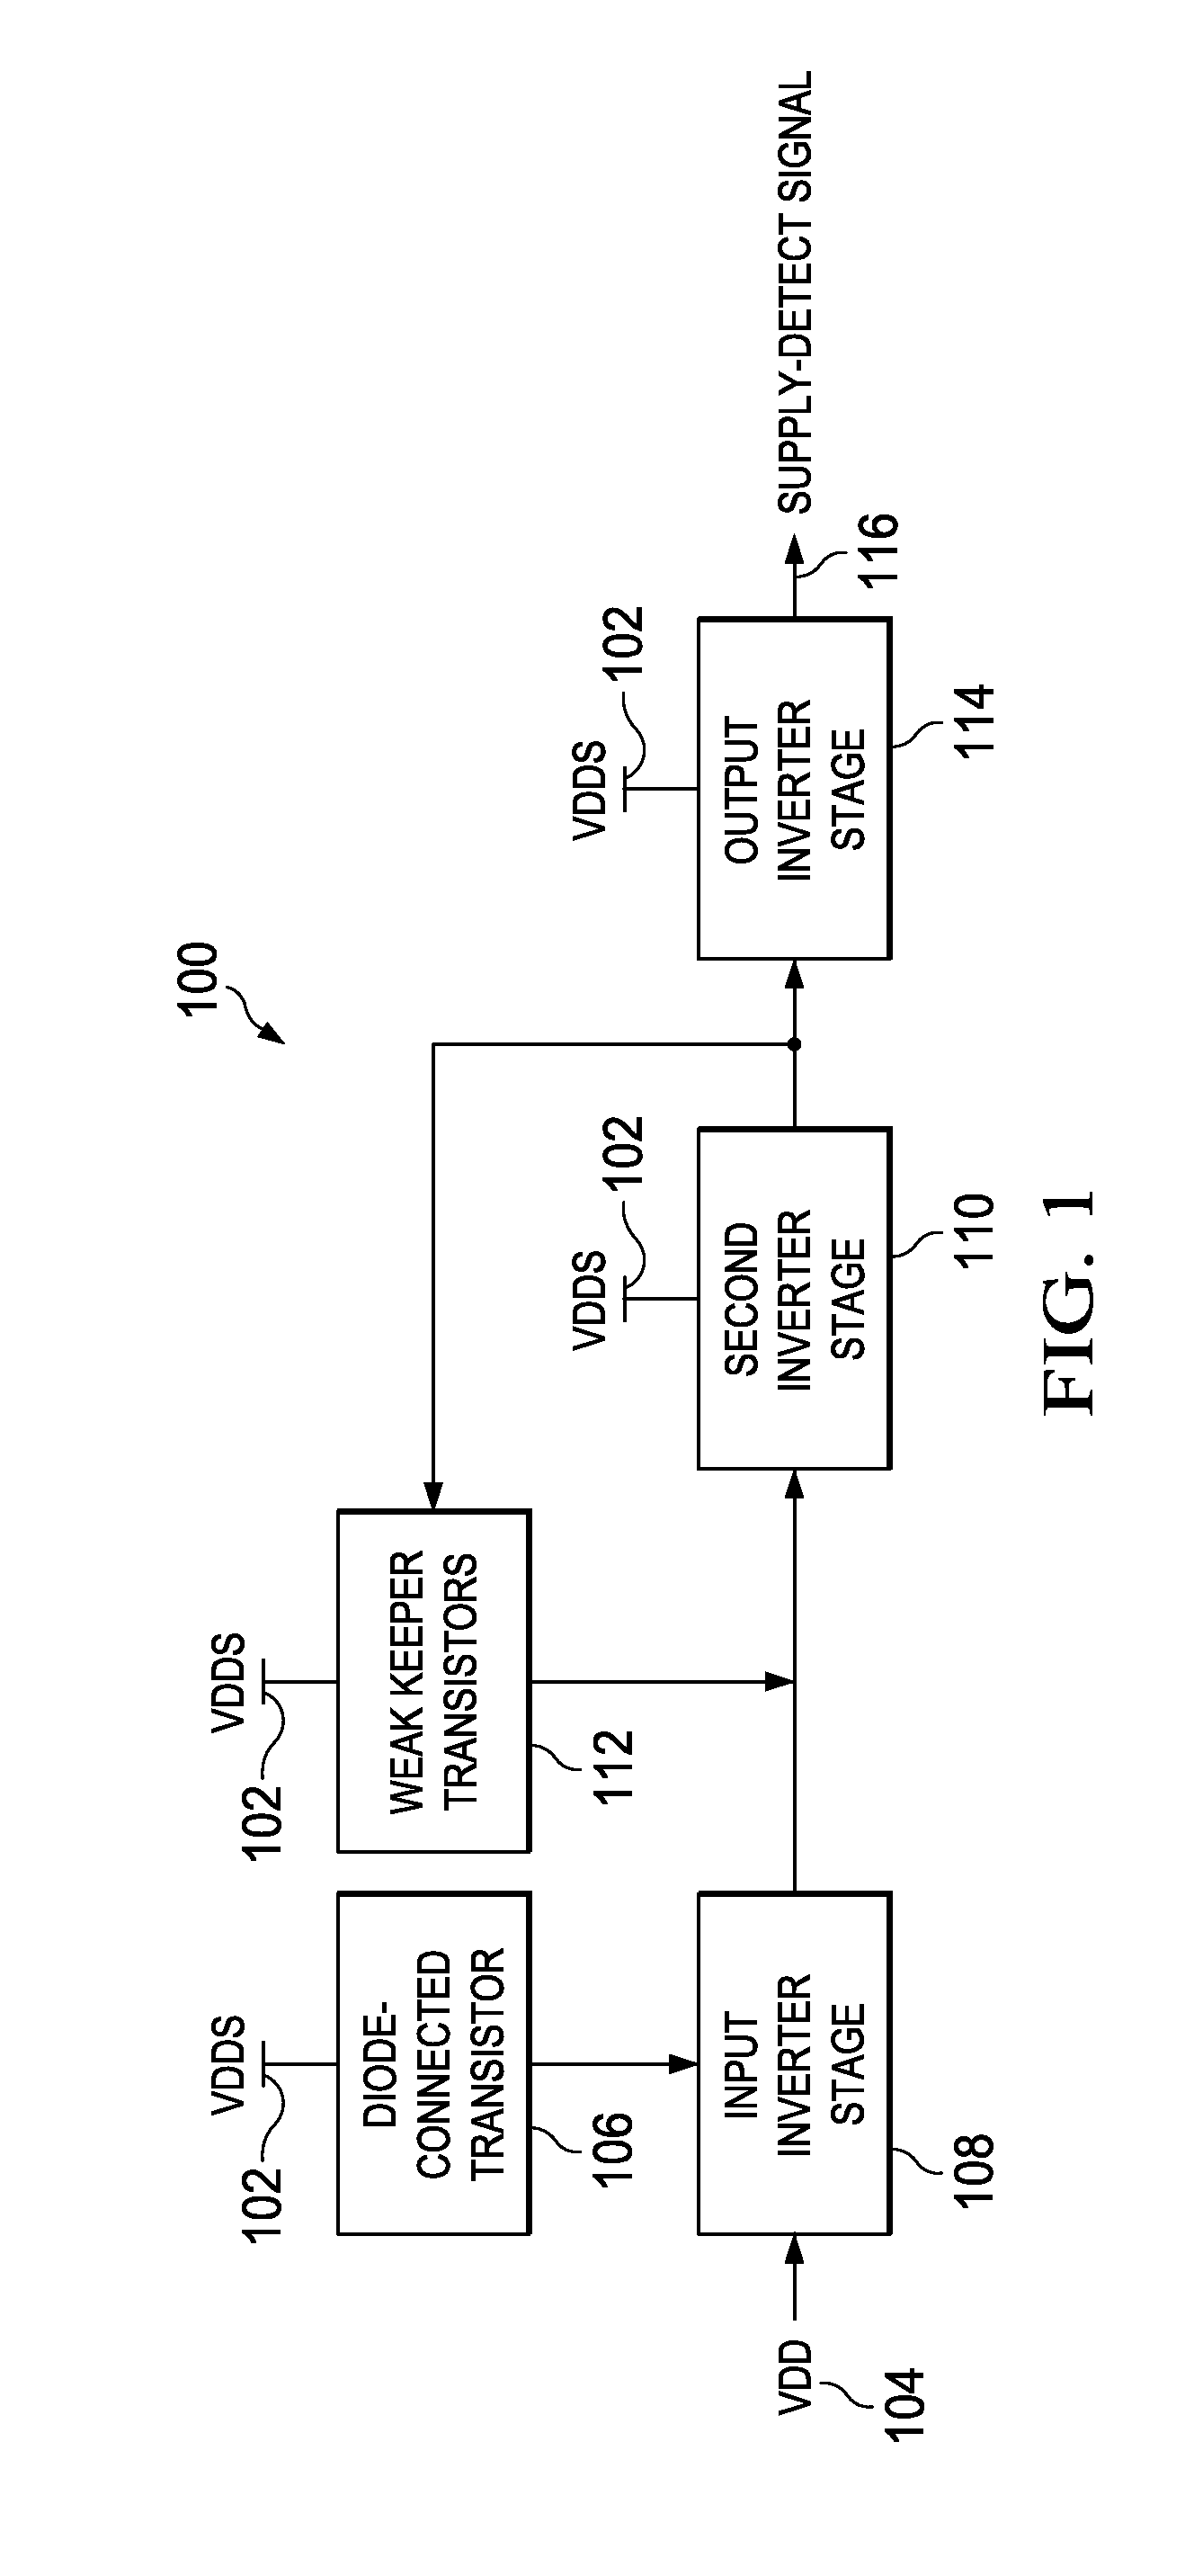 Method to achieve true fail safe compliance and ultra low pin current during power-up sequencing for mobile interfaces